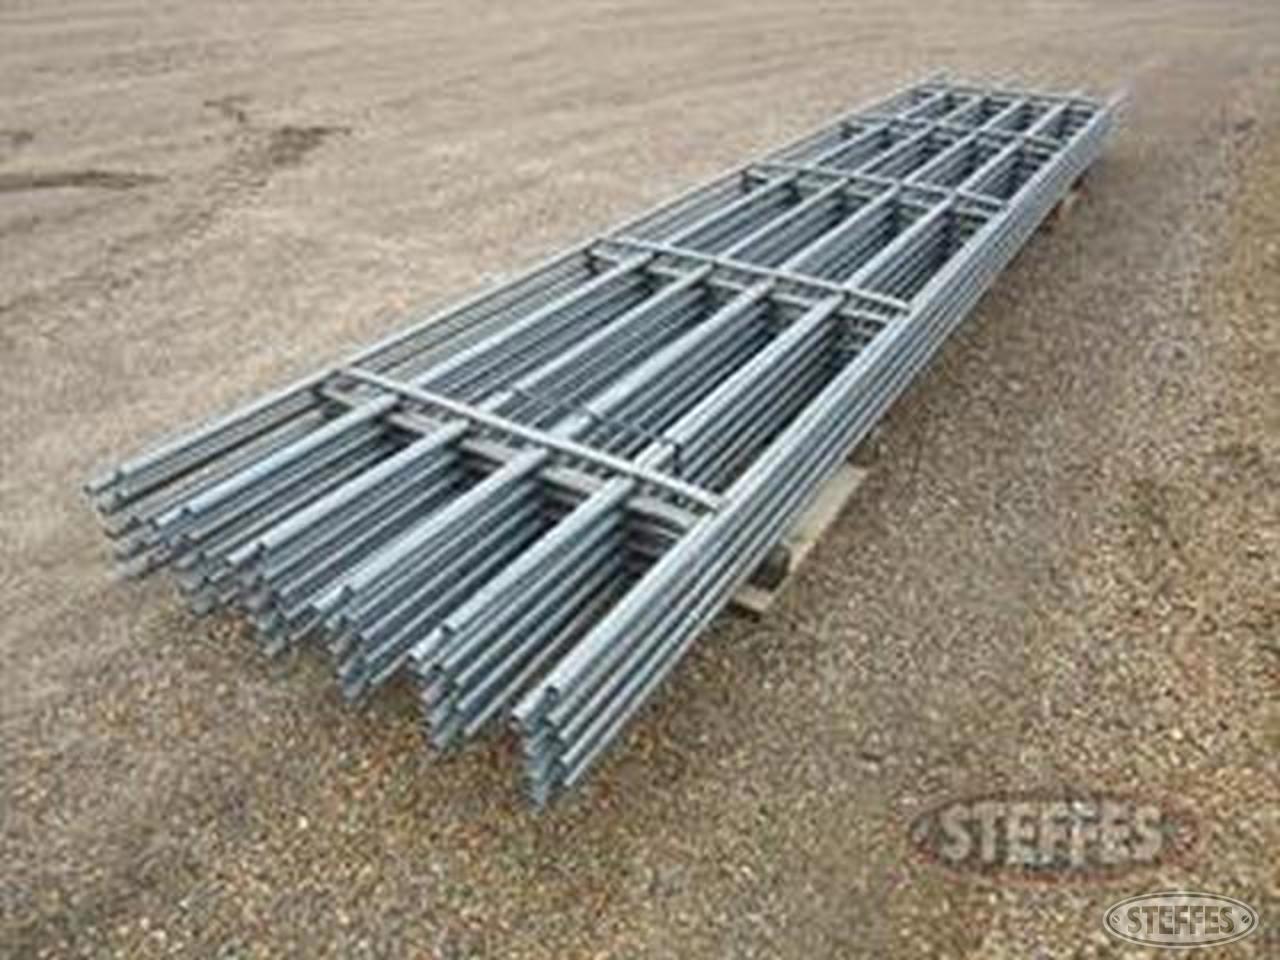 (10) Continuous fence panels